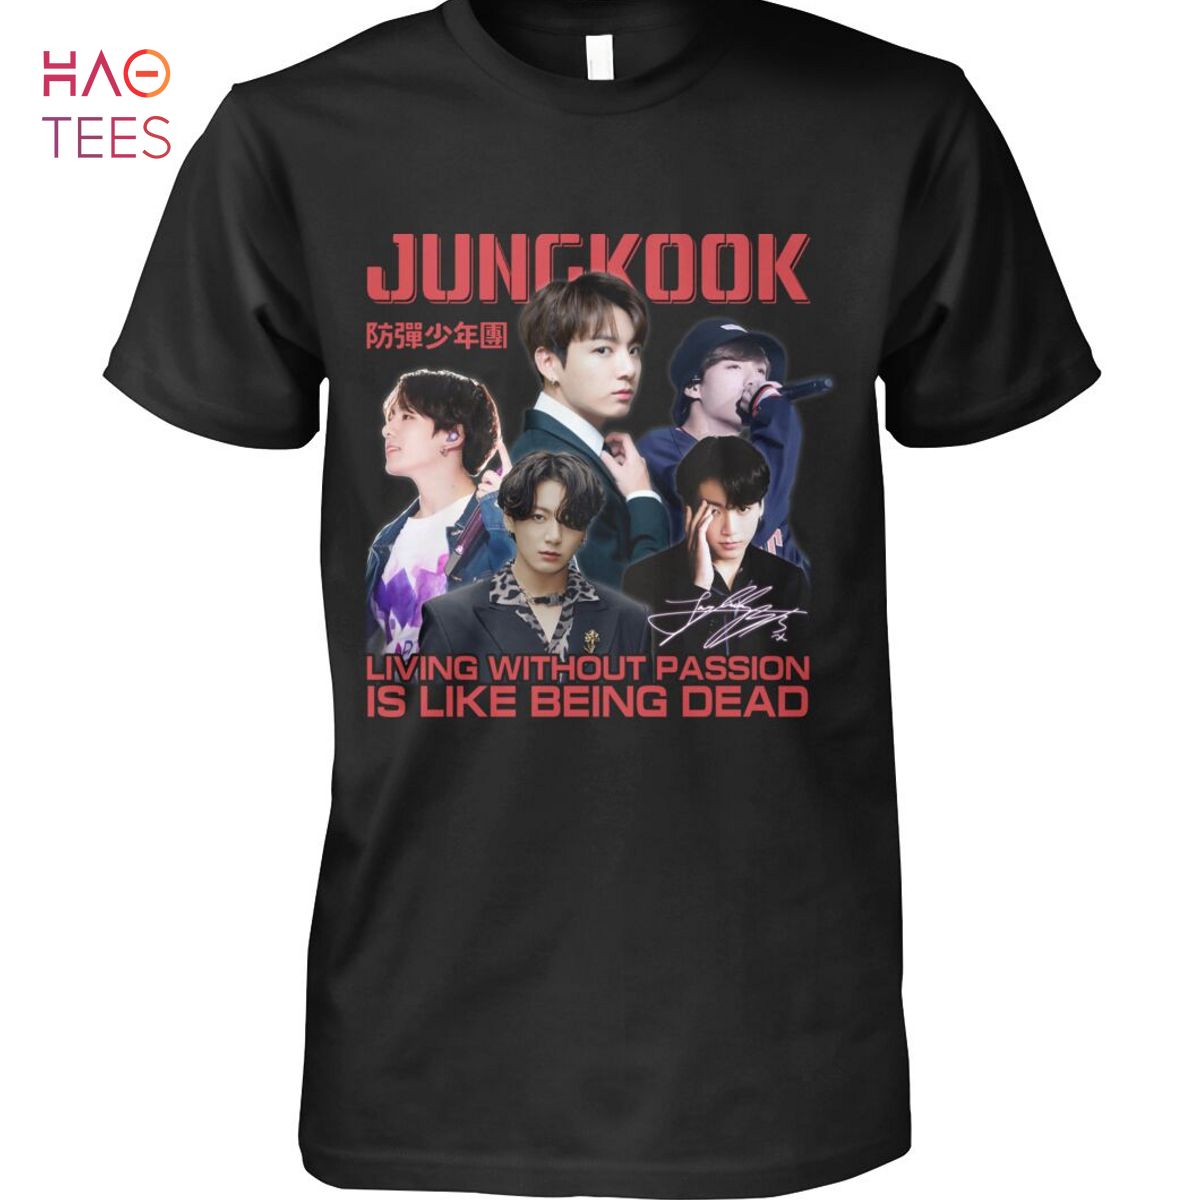 BTS' Jungkook expensive shirts  5 of the most expensive shirts sported by  BTS member Jungkook